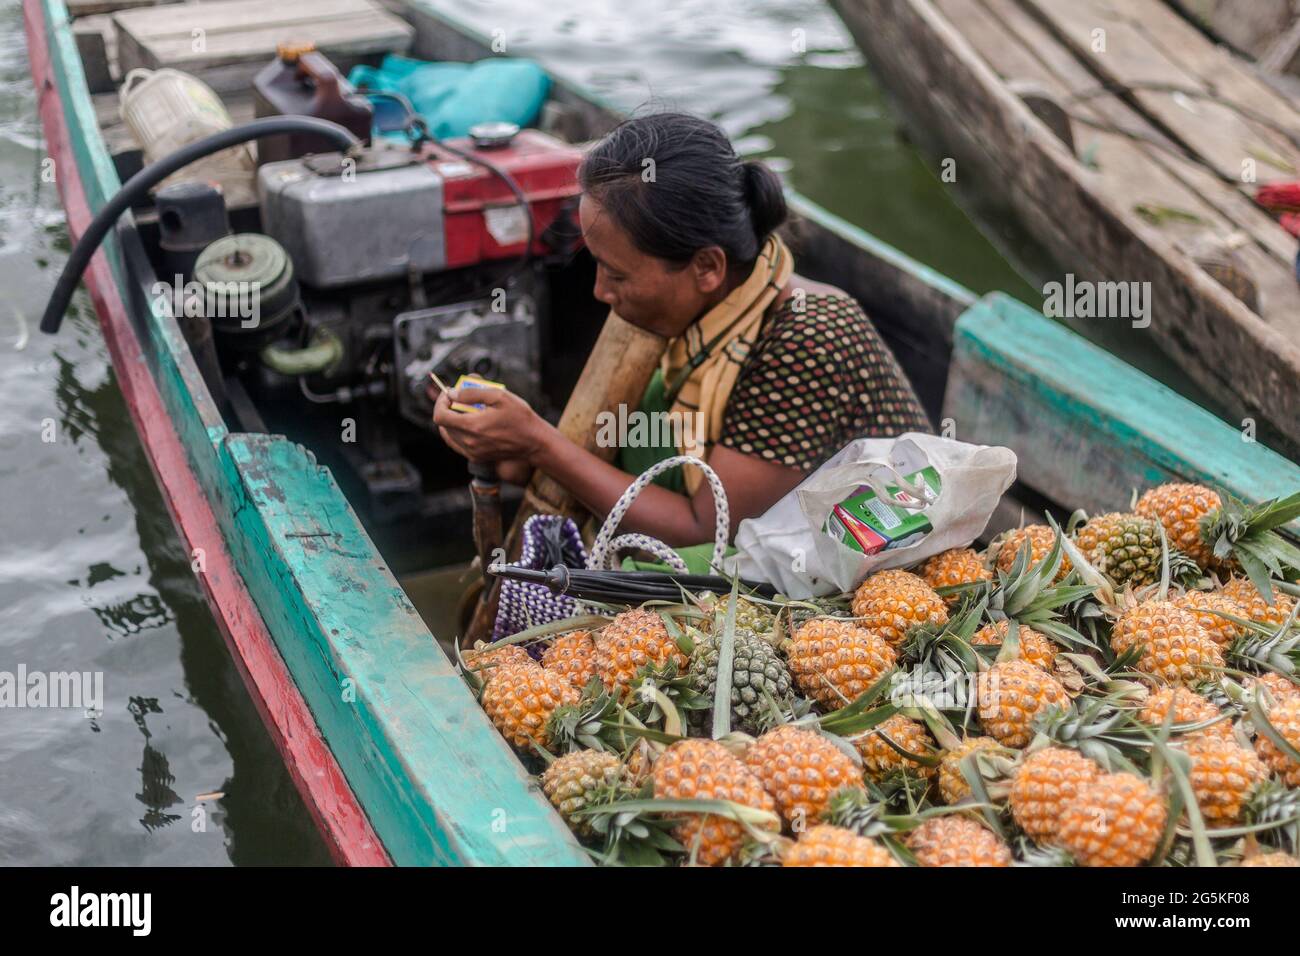 This is a floating market of seasonal fruits and vegetables at ‘SAMATA GHAT', Banorupa Bazar, Rangamati. The Tribal people sell their product every early morning at minimum price in a wholesale basis. The buyer bargaining the price before buy the goods. A single buyer buy the whole boat. The tribal people live in remote area of Rangamati hill tracks, where boat is the only means of communication. Some of the tribal seller come with family and stay until their goods sold. (Photo by Sanchayan Chowdhury/Pacific Press/Sipa USA) Stock Photo